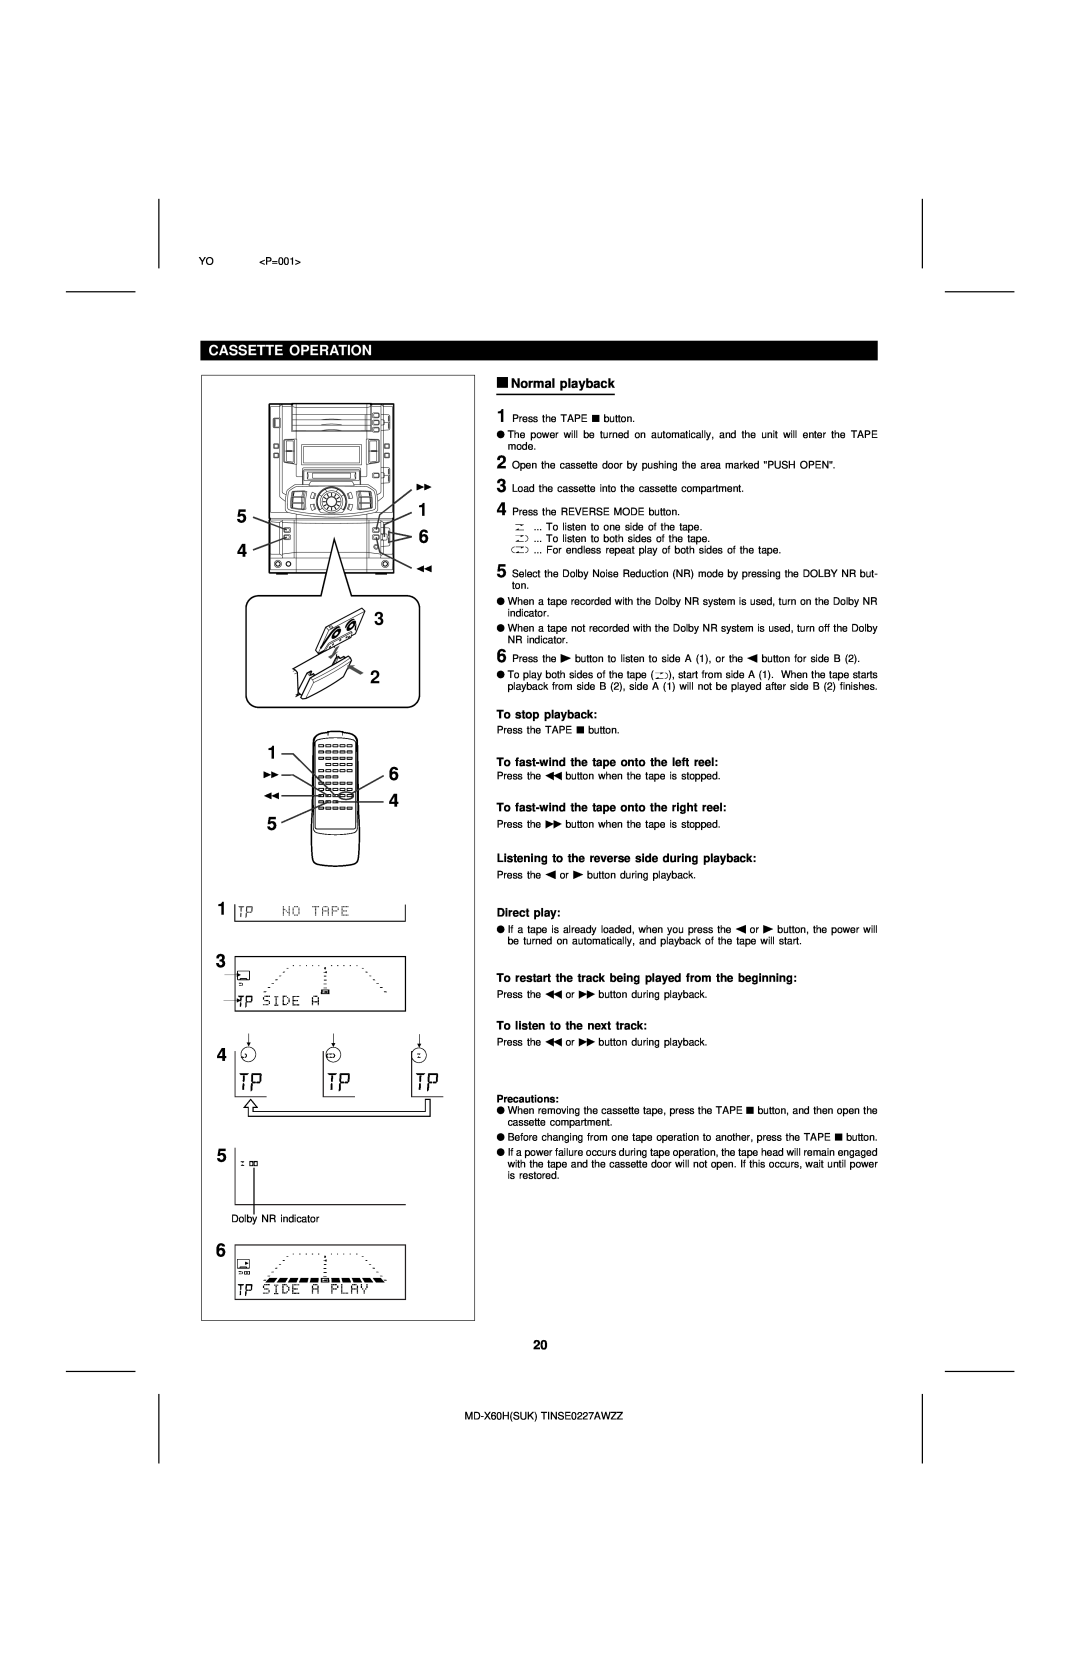 Sharp MD-X60H operation manual Cassette Operation, Normal playback 